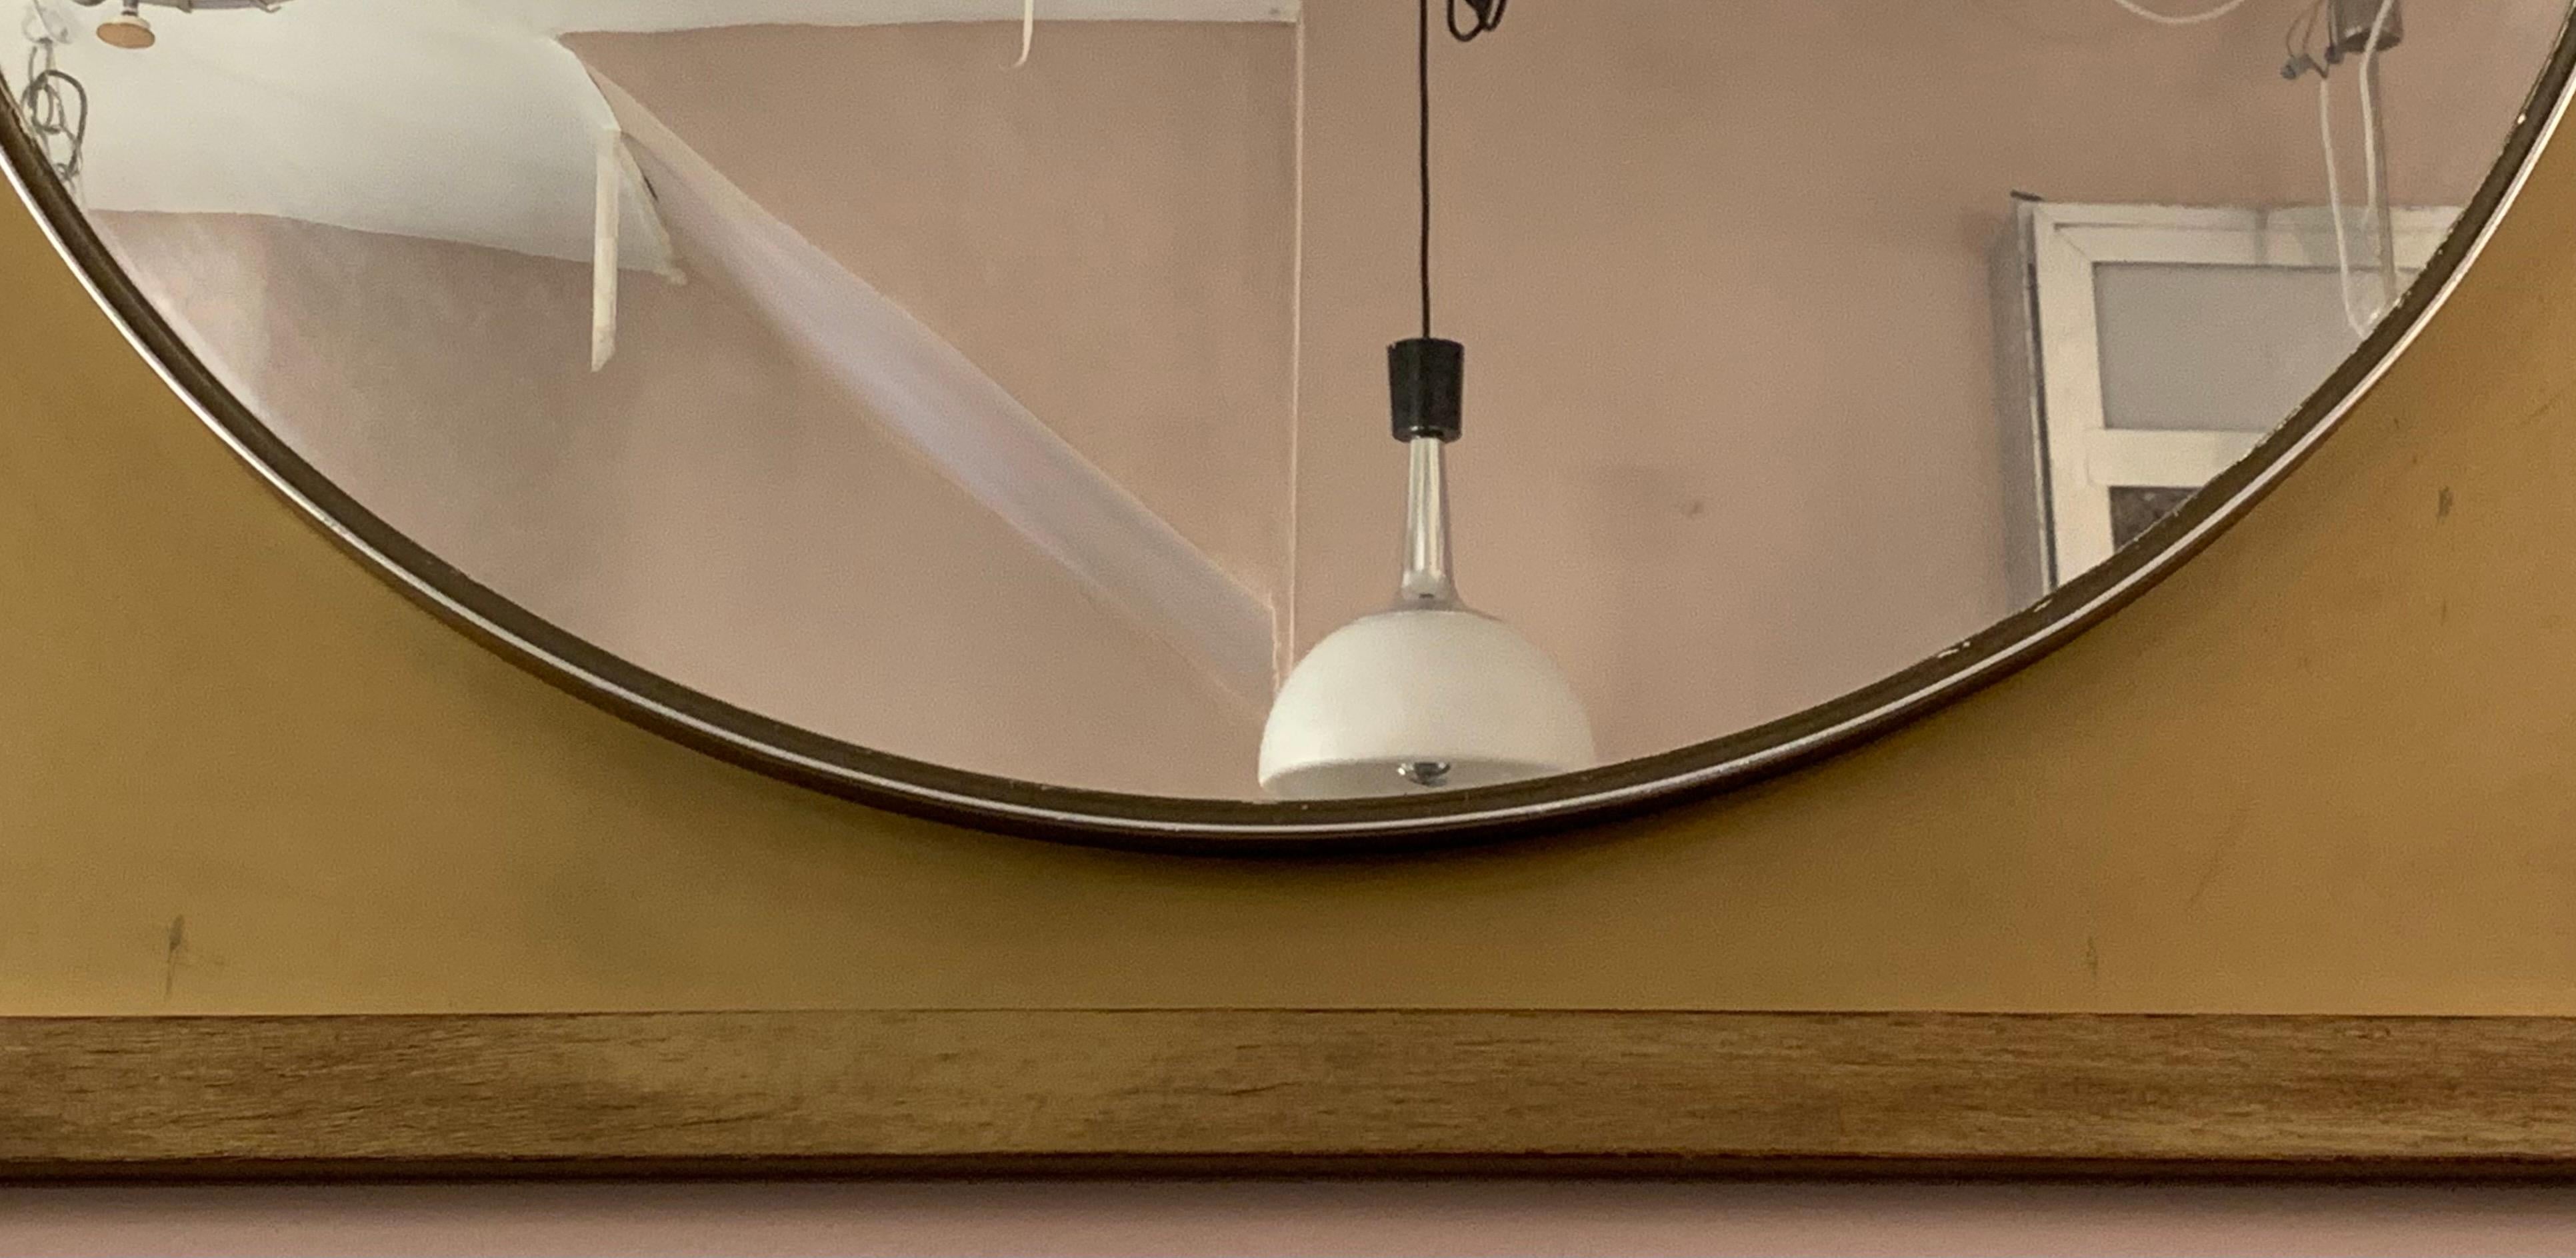 Vintage Round Mirror on a Square Gold Frame 1